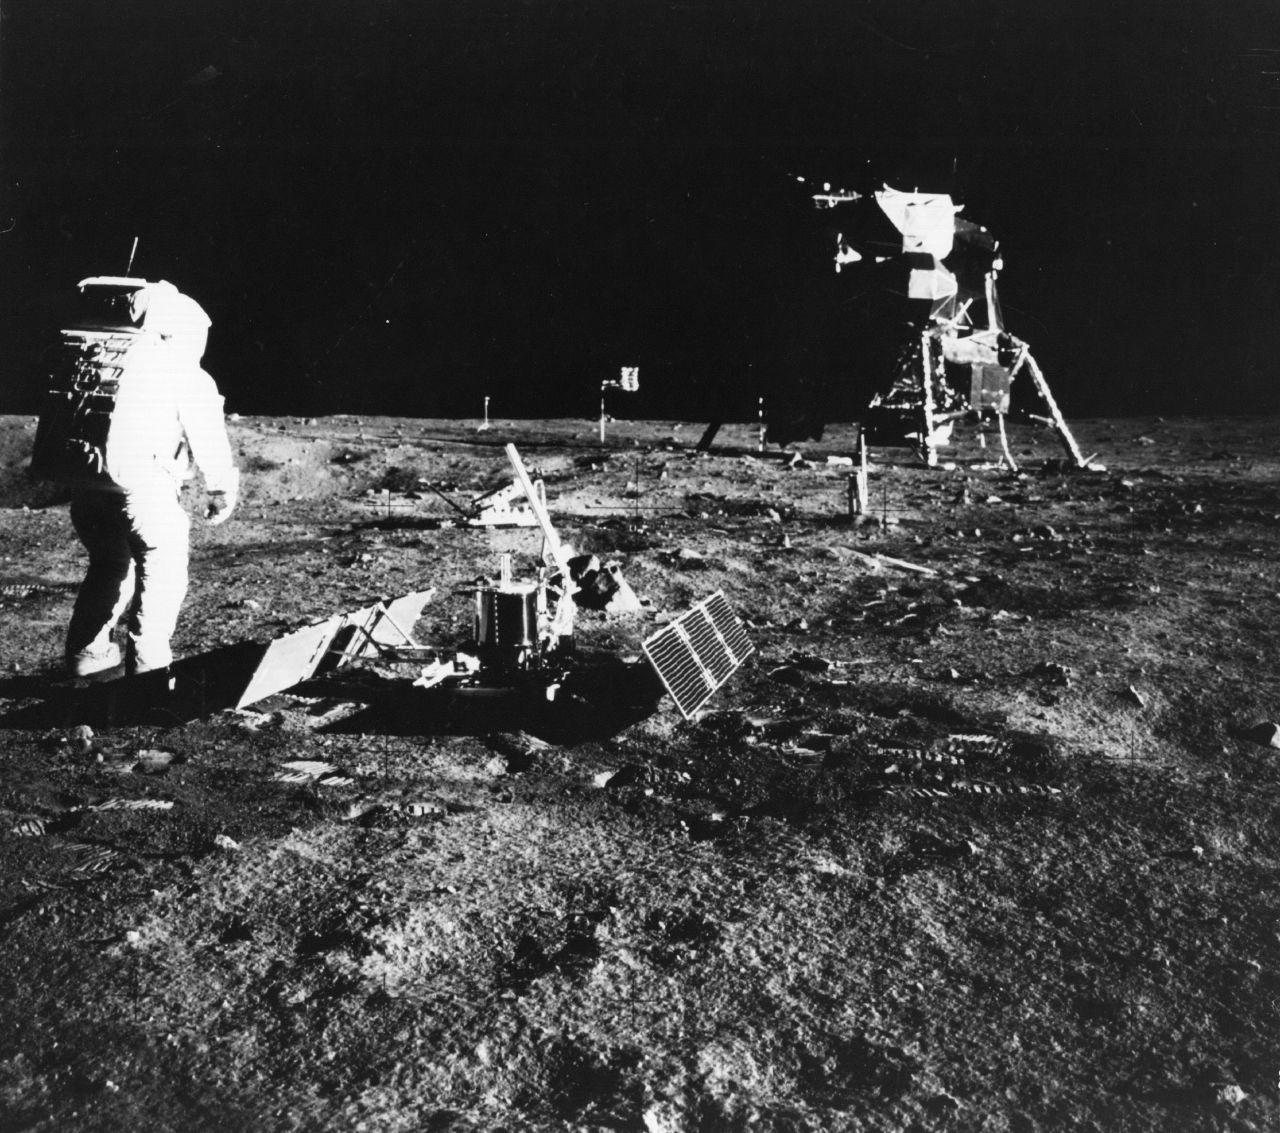 Verne's predictions of a trip to the moon came true in 1969, when the Apollo 11 mission launched from Cape Kennedy. Buzz Aldrin and Neil Armstrong took "one small step for a man, one giant leap for mankind," and became the <a href="https://www.nasa.gov/audience/forstudents/k-4/stories/first-person-on-moon.html" target="_blank" target="_blank">first men on the moon</a>.